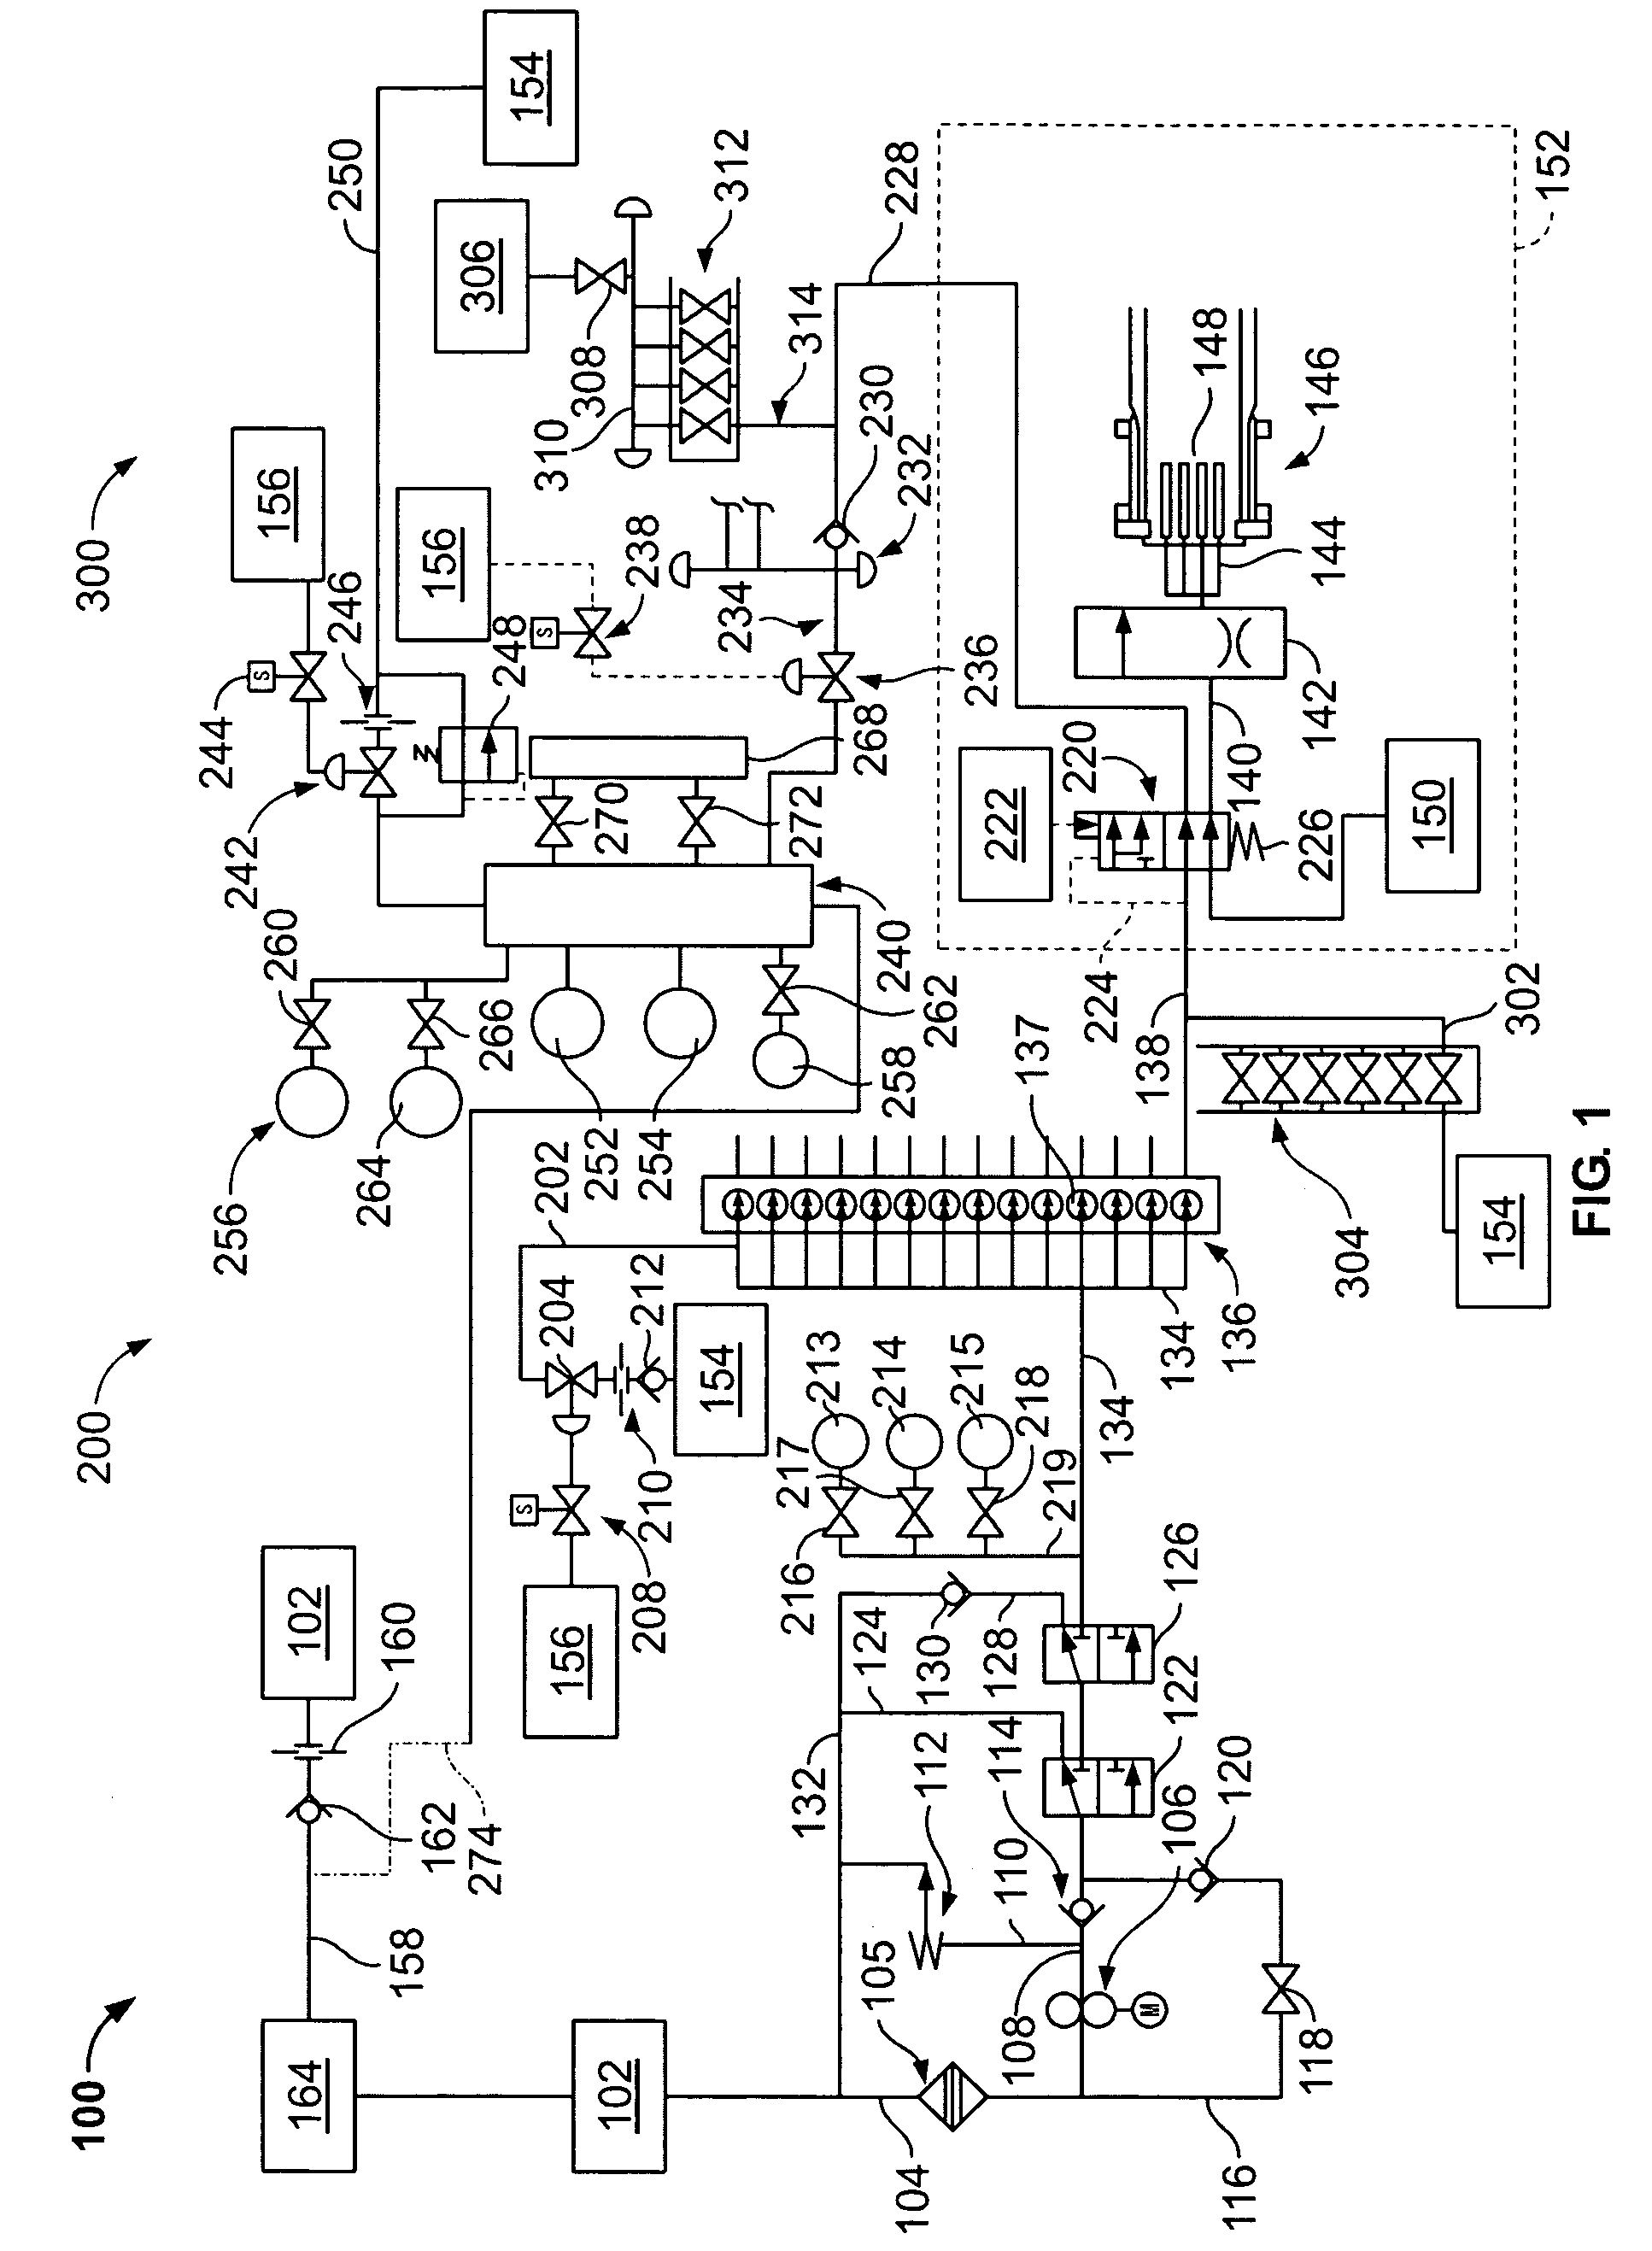 Methods and apparatus for a combustion turbine fuel recirculation system and nitrogen purge system